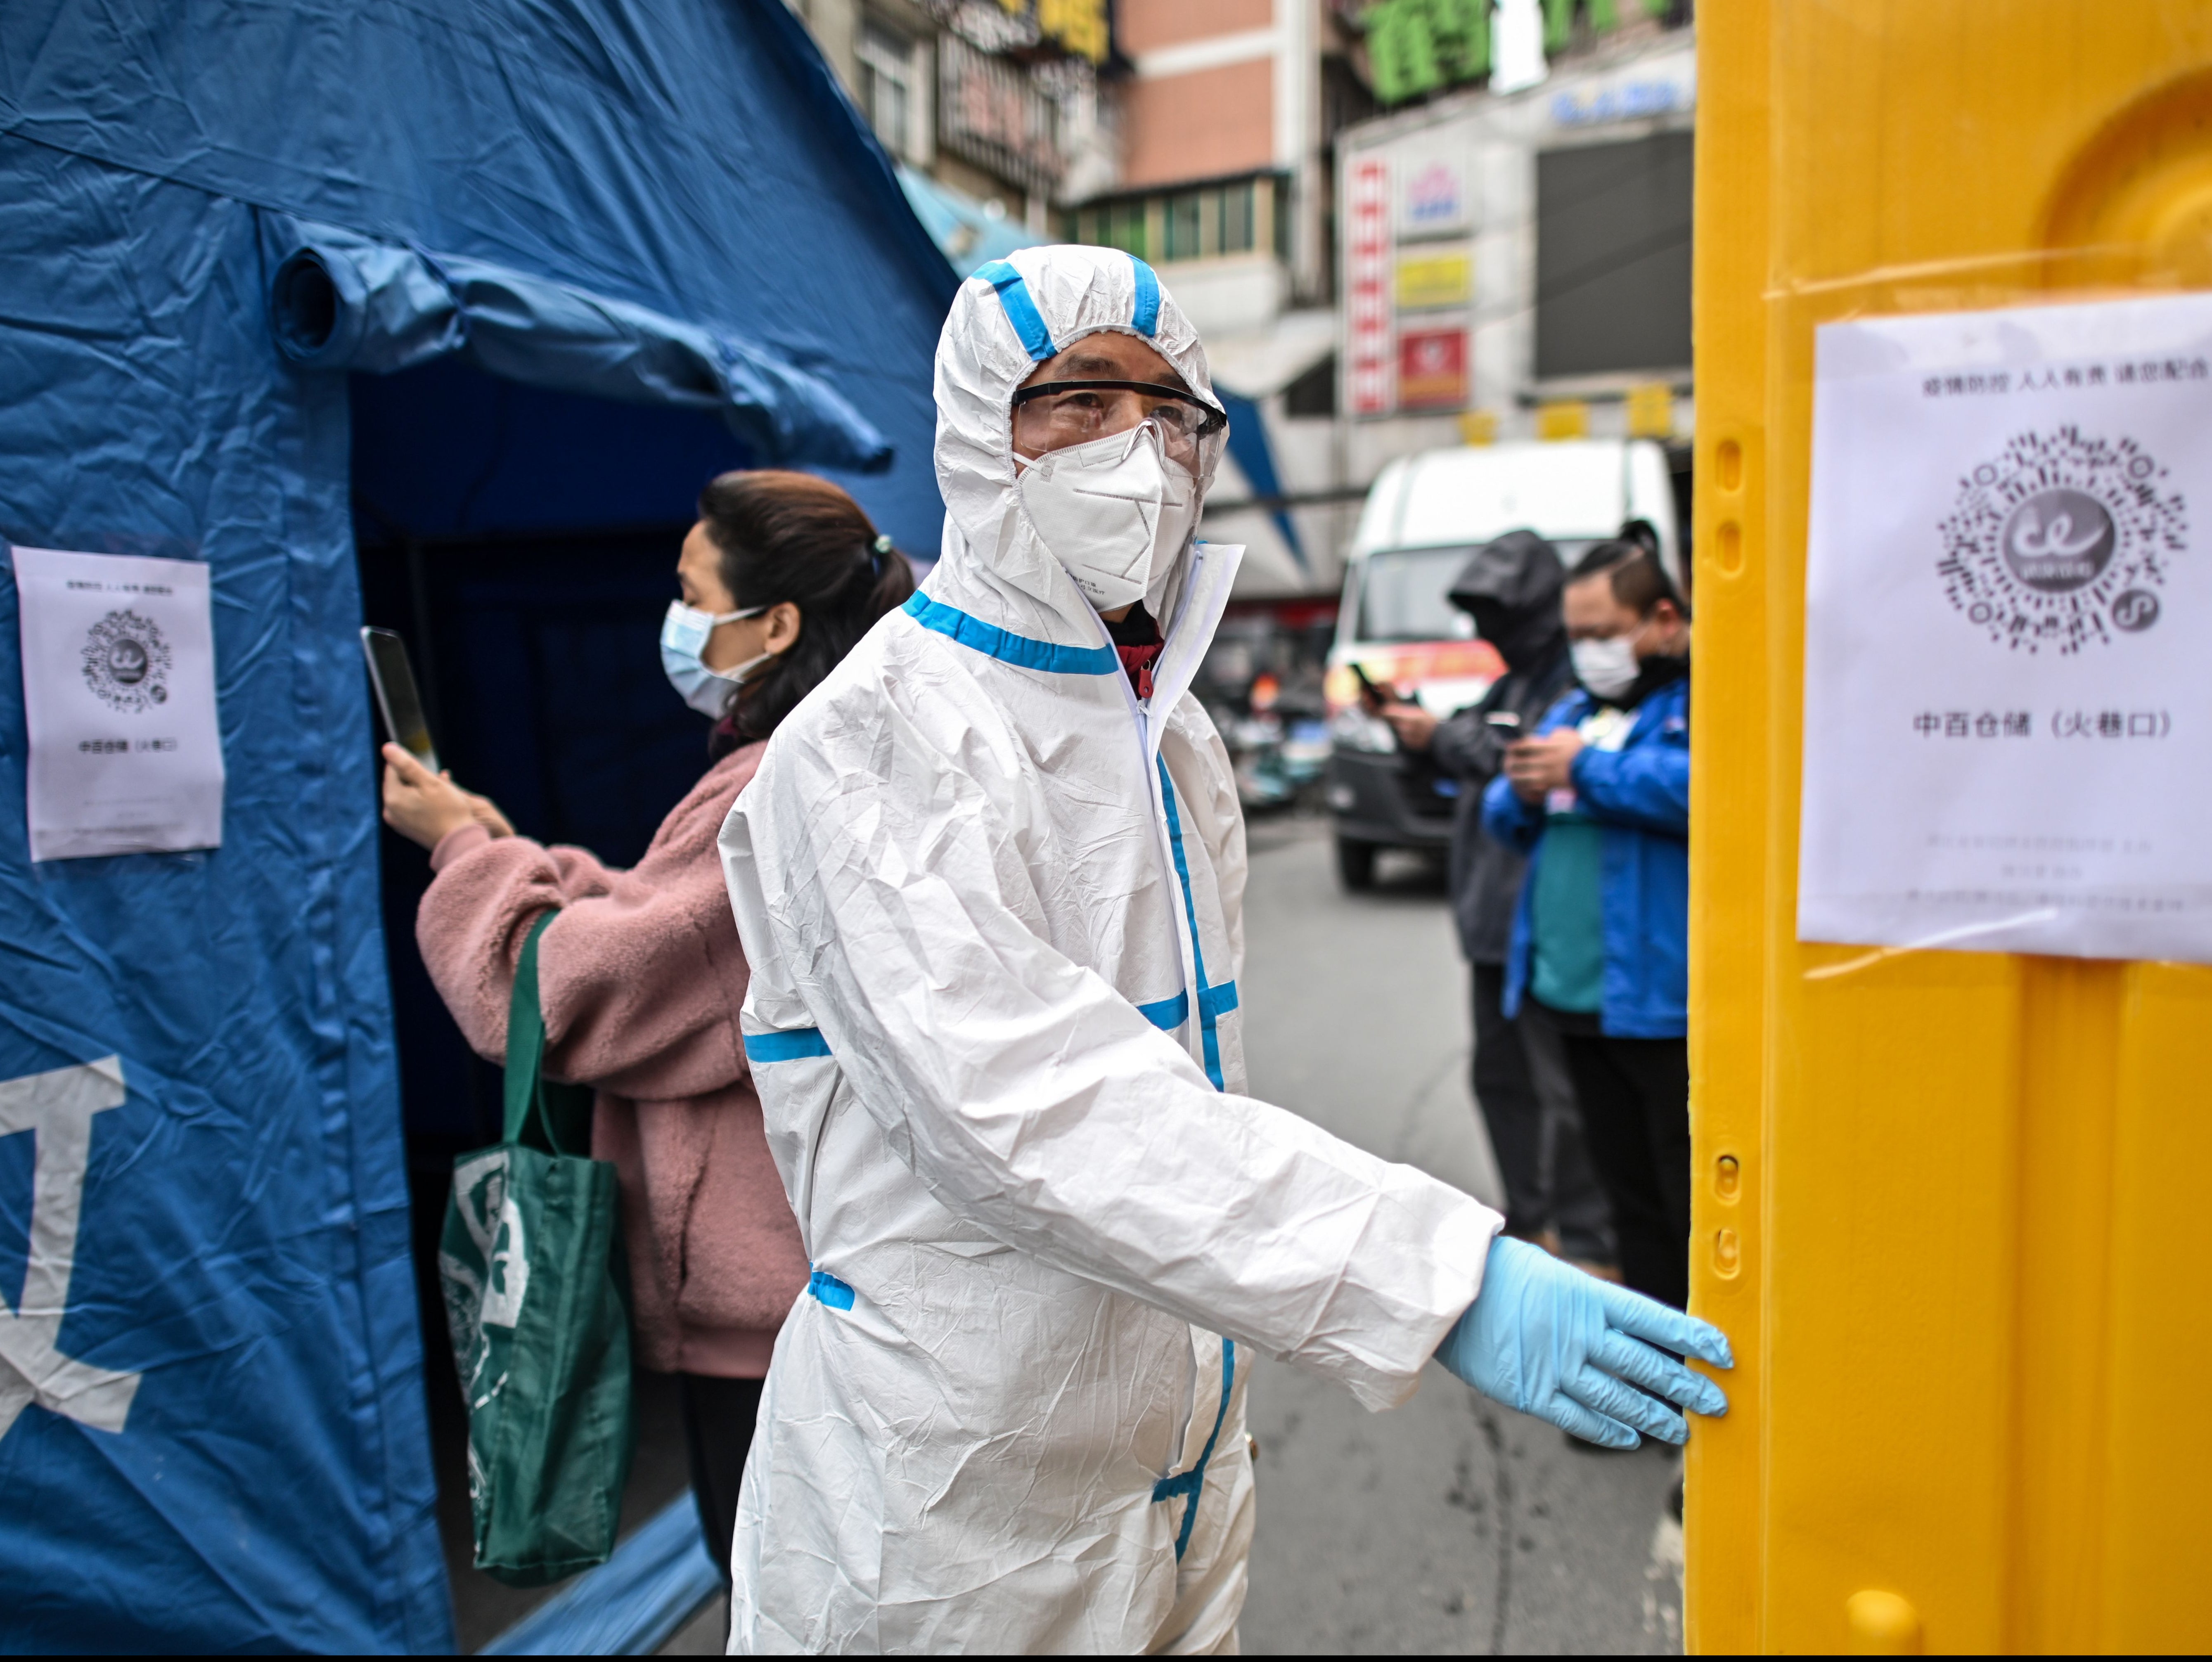 A man wearing a protective suit controls the access to a market in Wuhan in March 2020